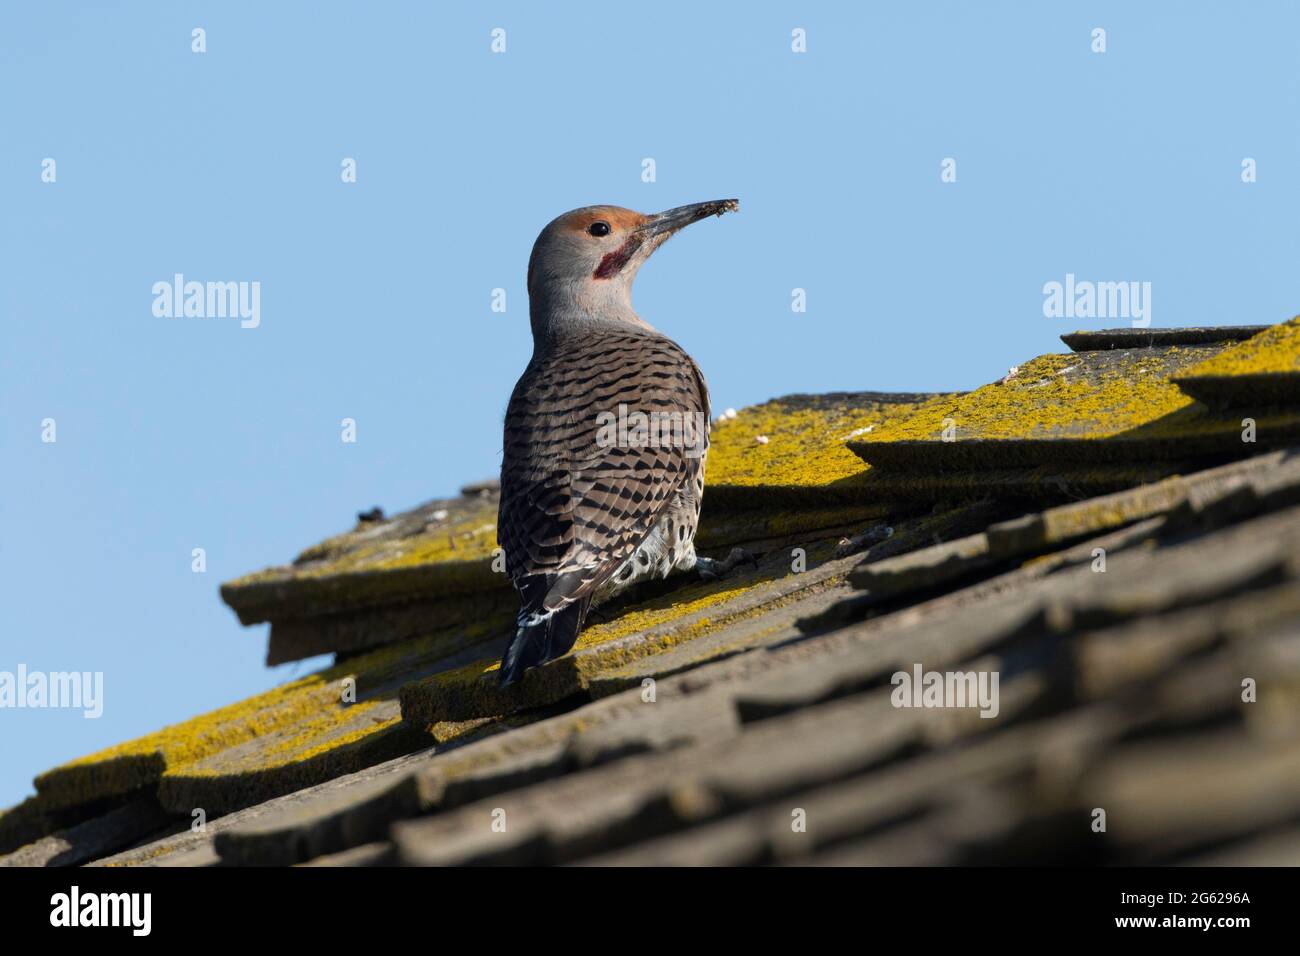 An adult male Northern Flicker, Colaptes auratus, feeds on ants from a wooden-shingled roof in California's San Joaquin Valley. Stock Photo